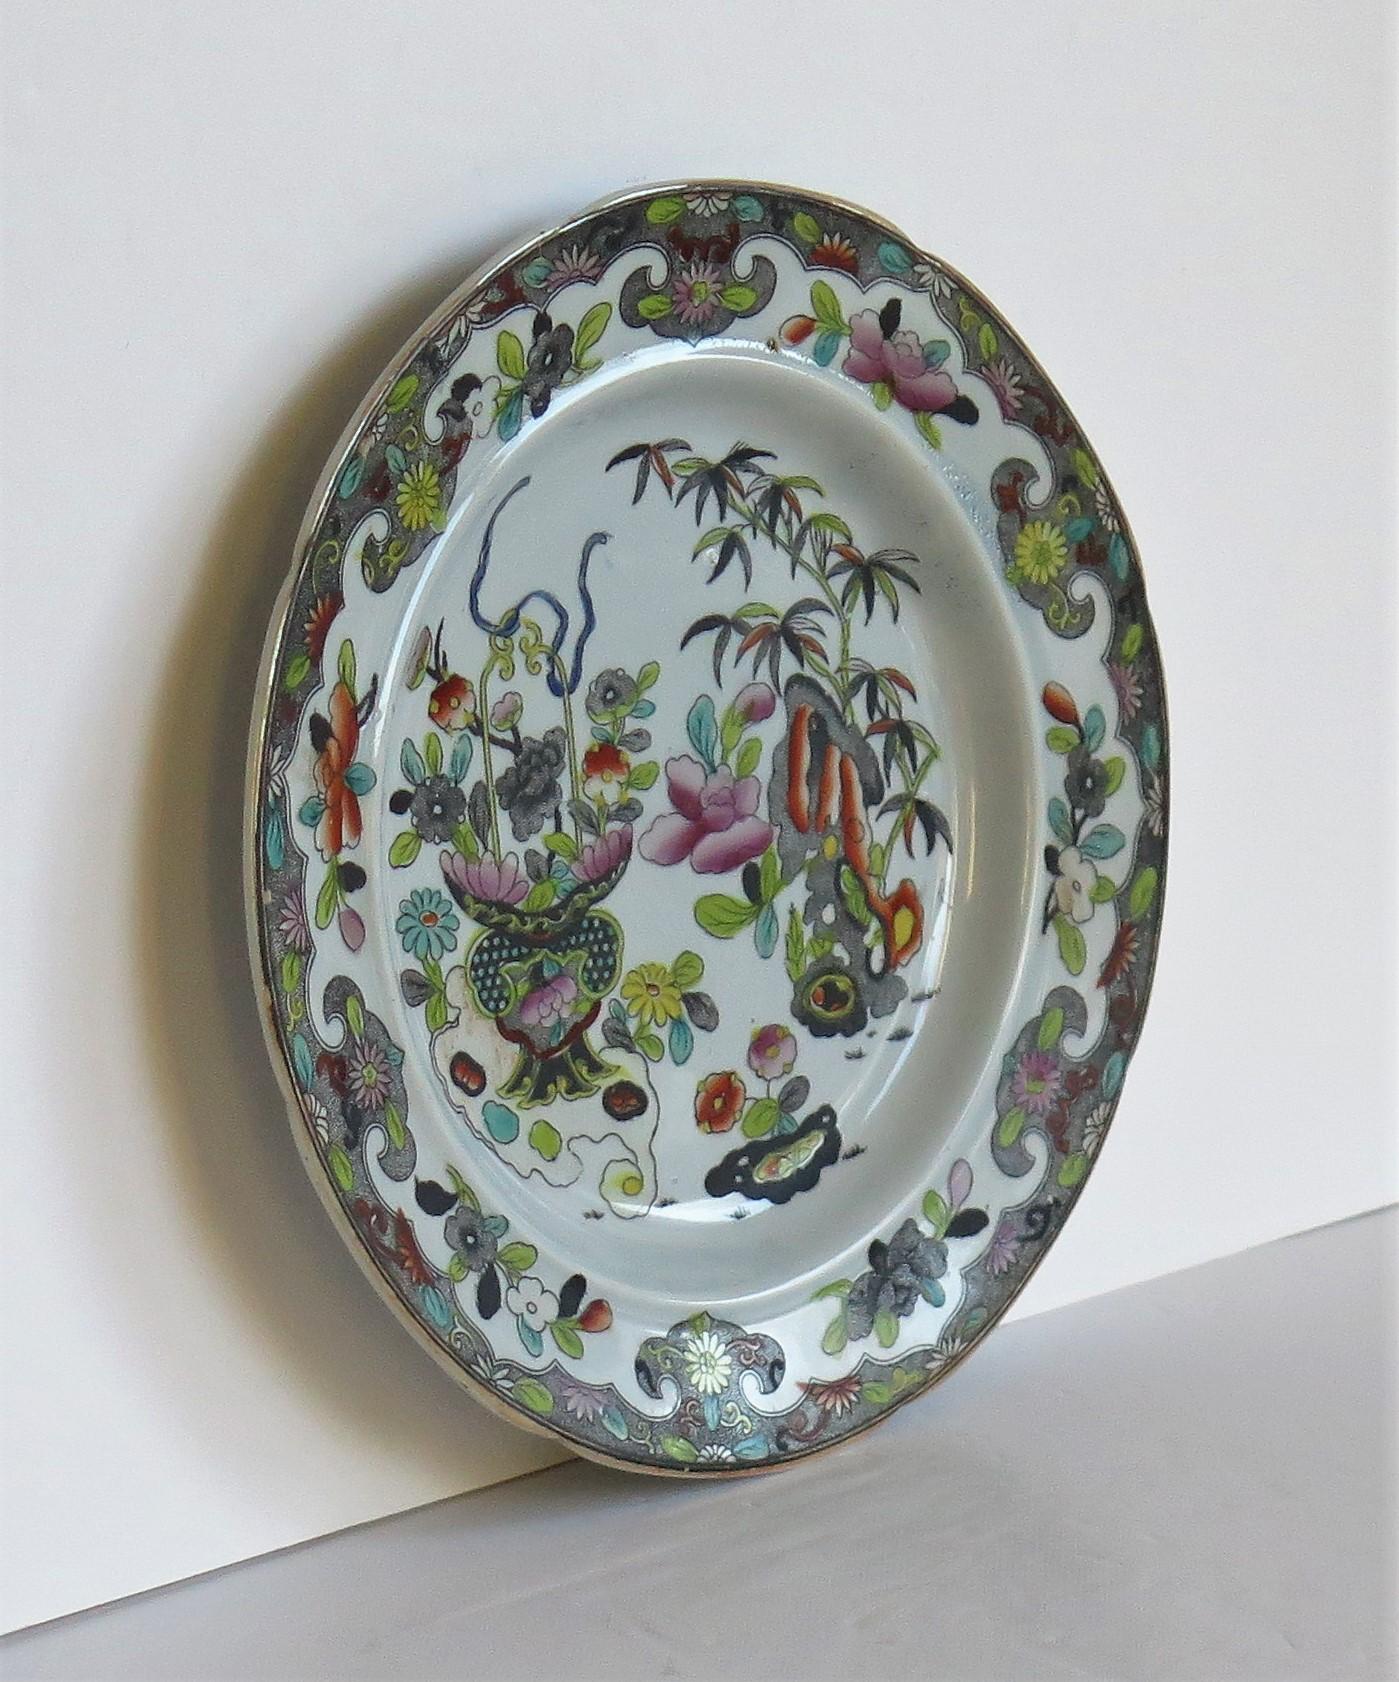 Chinoiserie Stephen Folch Plate in Bamboo & Basket Pattern with Royal Arms mark, circa 1825 For Sale